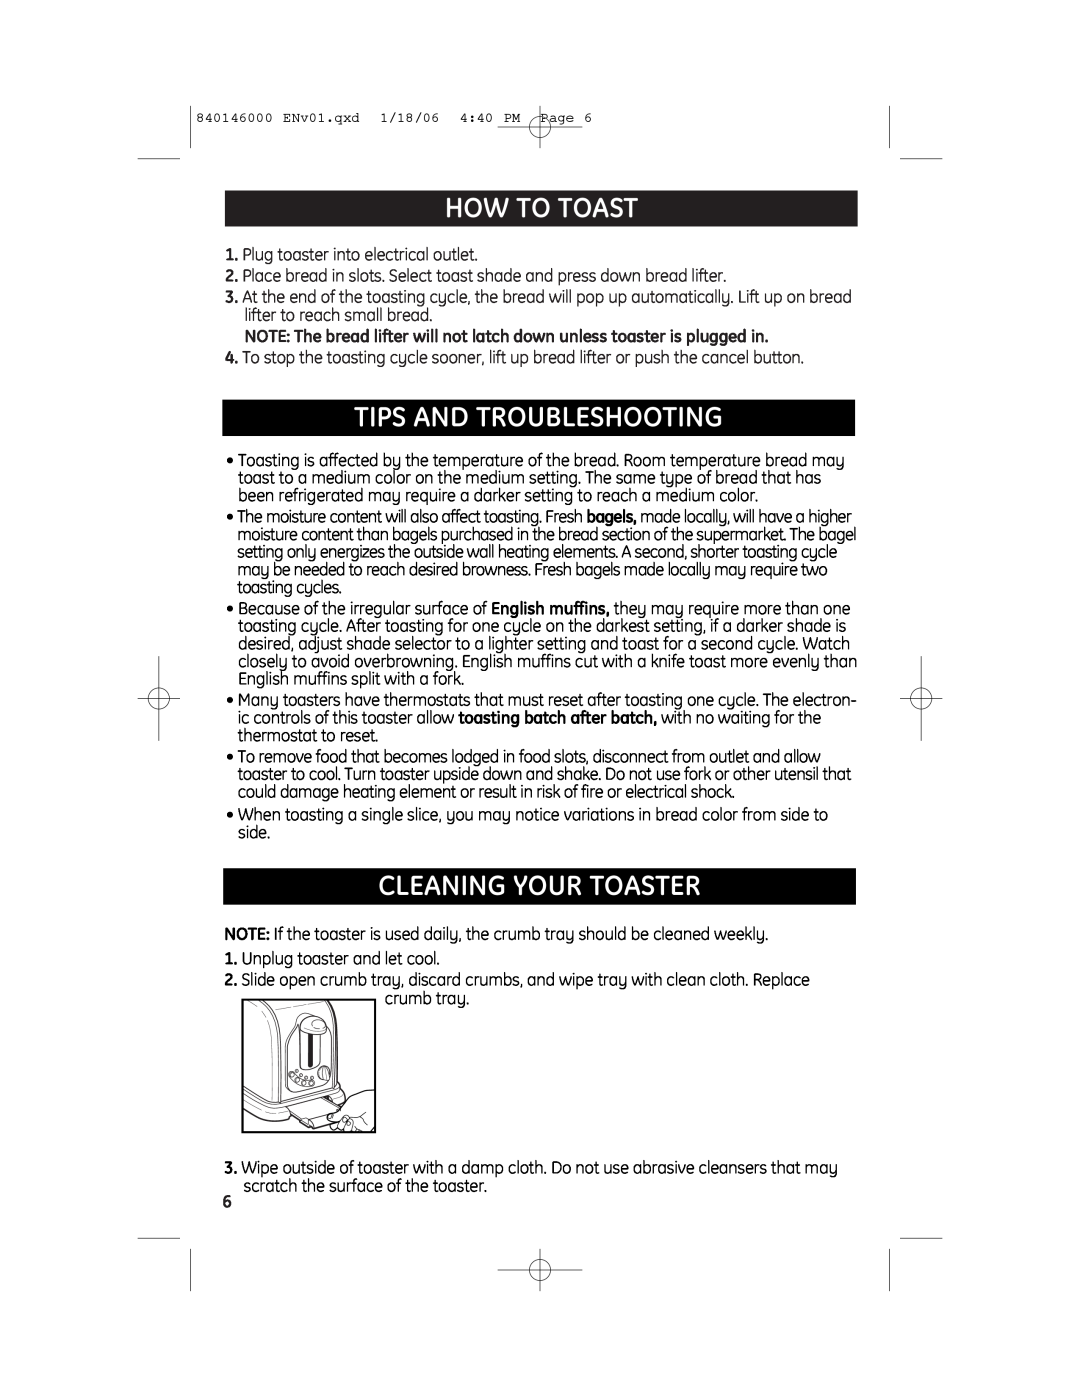 GE 840146000, 169002 manual How To Toast, Tips And Troubleshooting, Cleaning Your Toaster 